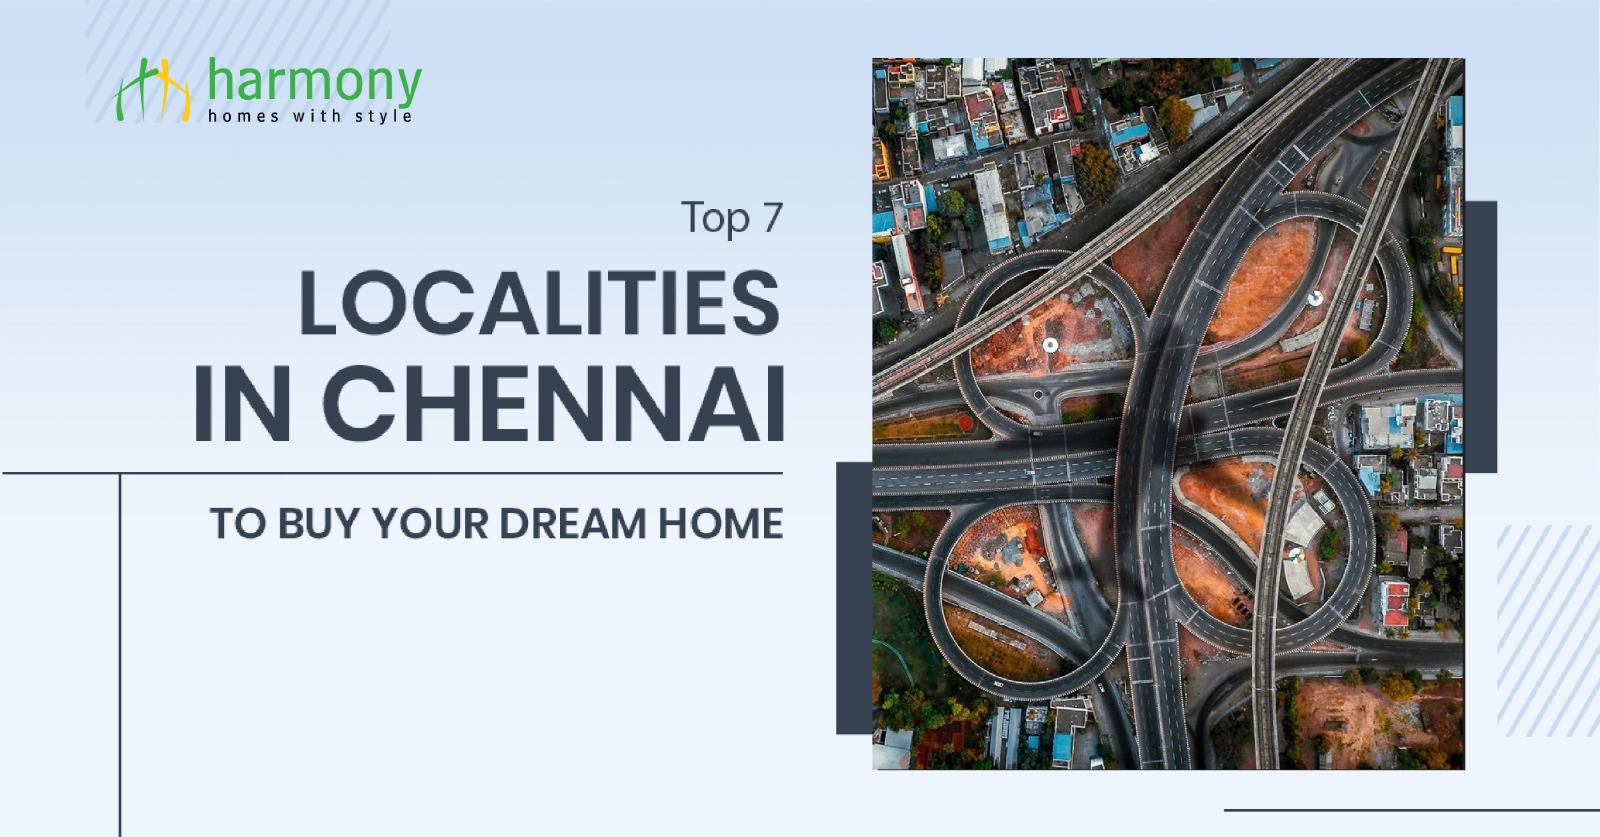 Top 7 Localities In Chennai To Buy Your Dream Home